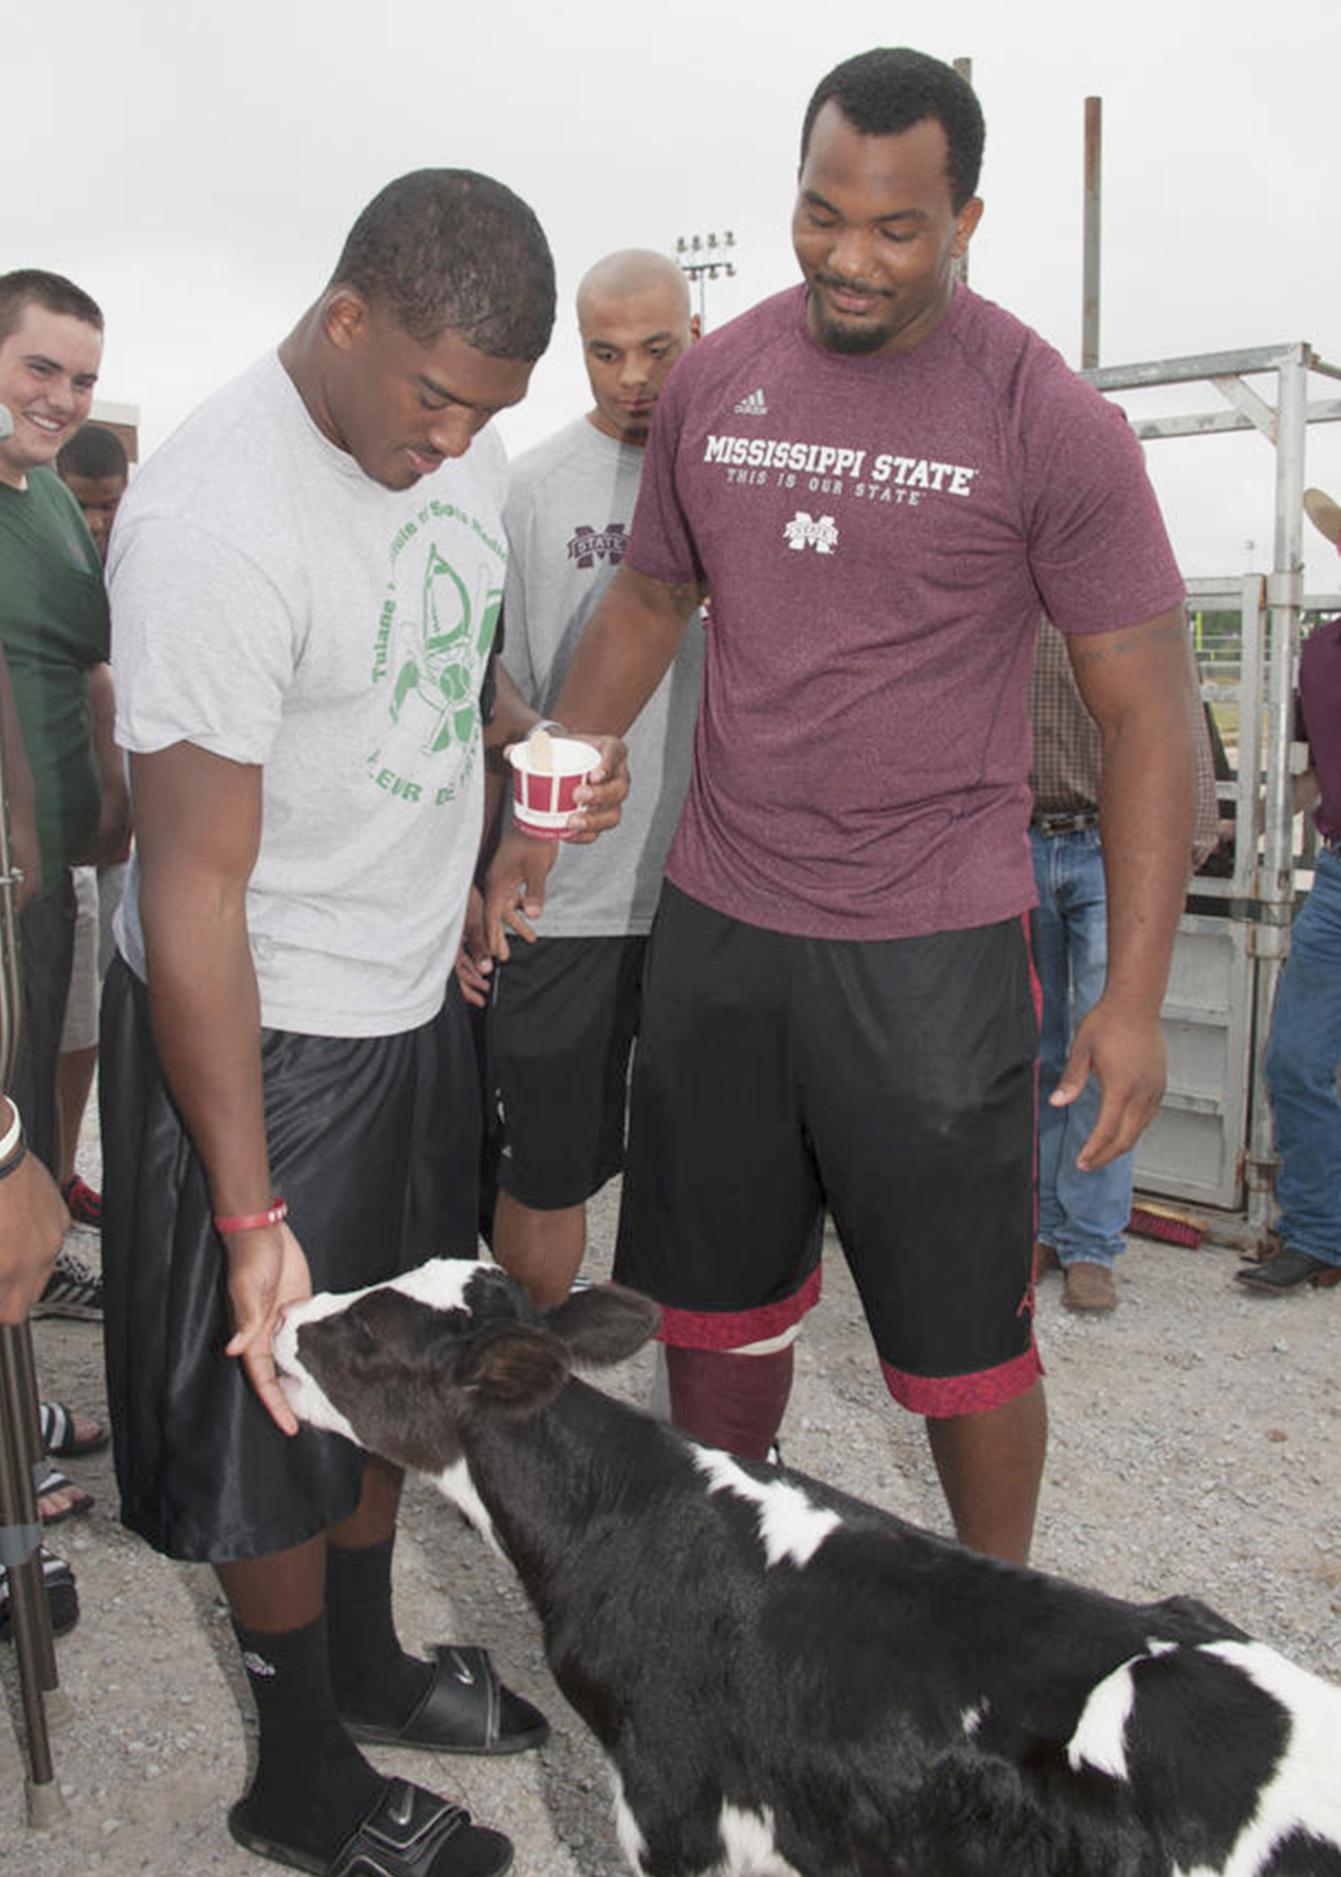 Quadry Antoine of Belle Chase, La., Rufus Warren of Indianola, and other members of Mississippi State University's football team play with a calf at the third annual Beefing Up the Bulldogs event at MSU on Aug. 18, 2013. (Photo by MSU Ag Communications/Kat Lawrence)